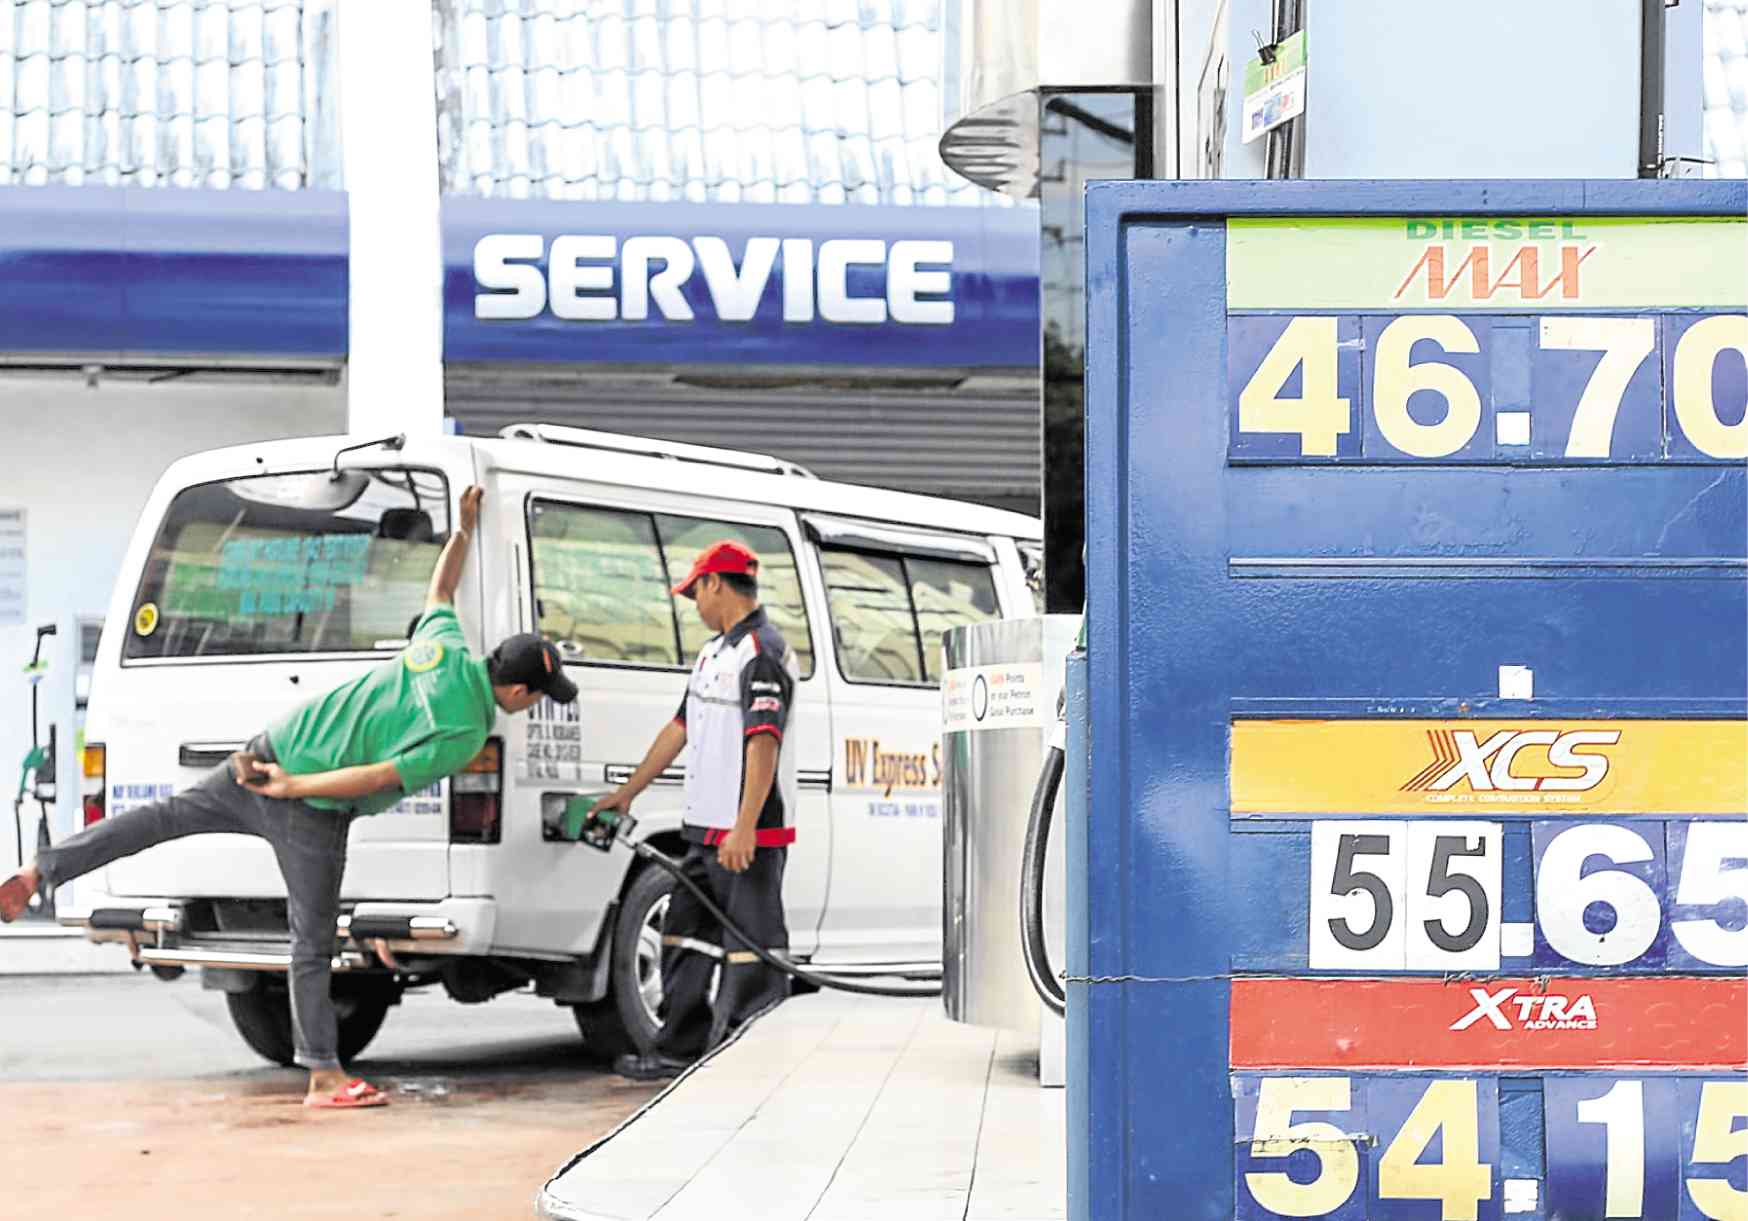 Higher ethanol blend can keep fuel prices low - Imee Marcos